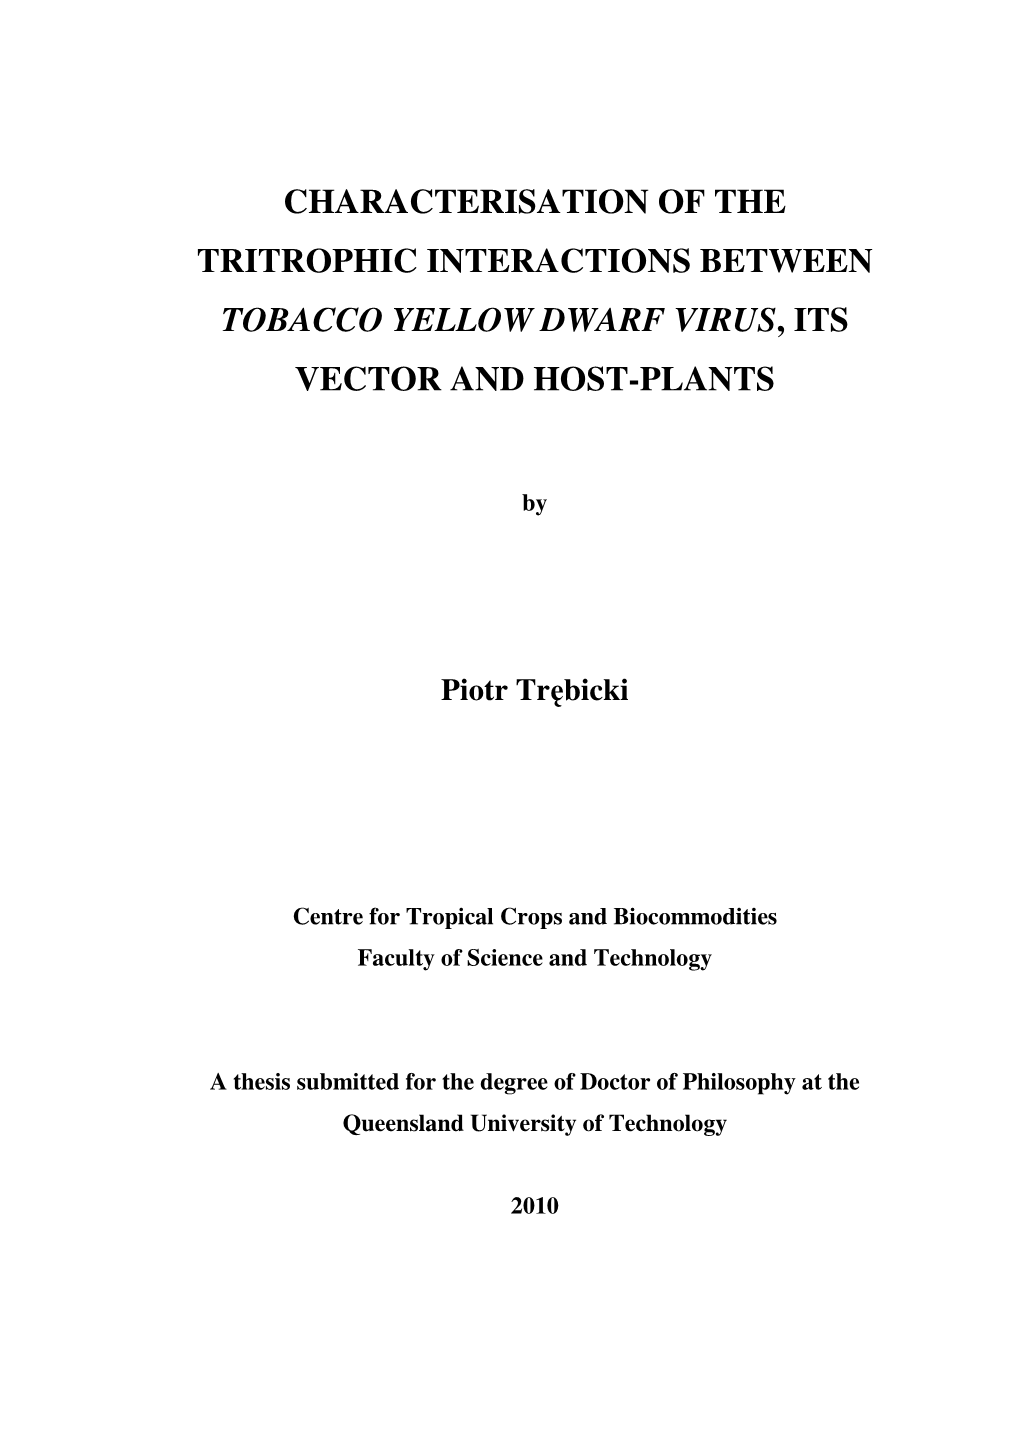 Characterisation of the Tritrophic Interactions Between Tobacco Yellow Dwarf Virus , Its Vector and Host-Plants